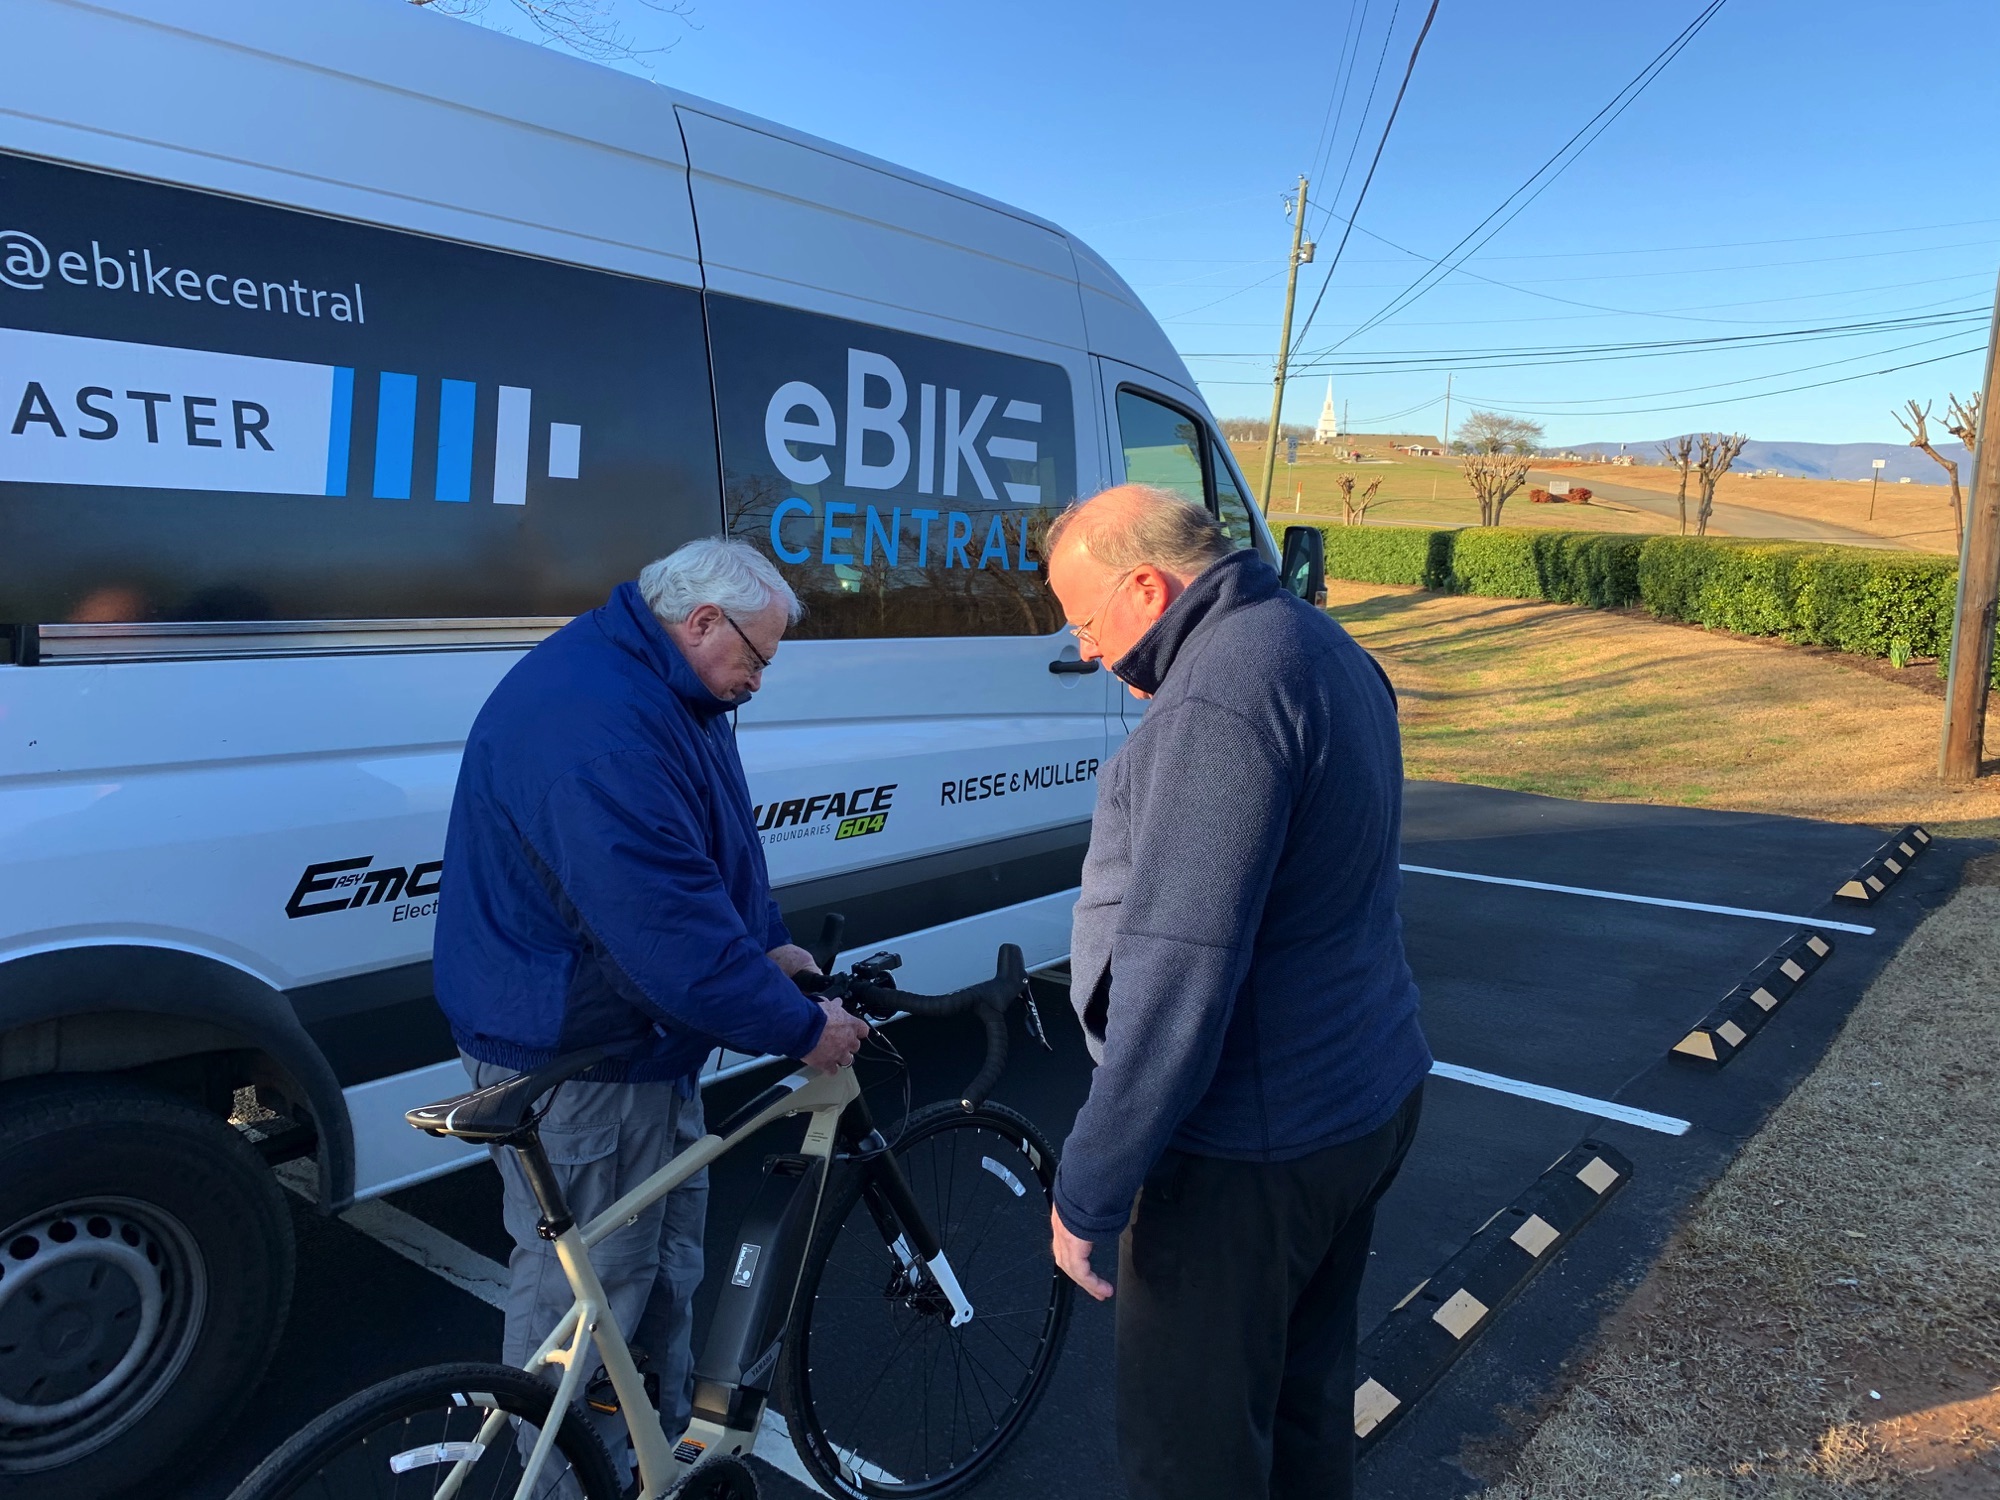 eBike Central's Joe Michel goes over features with customer Martin